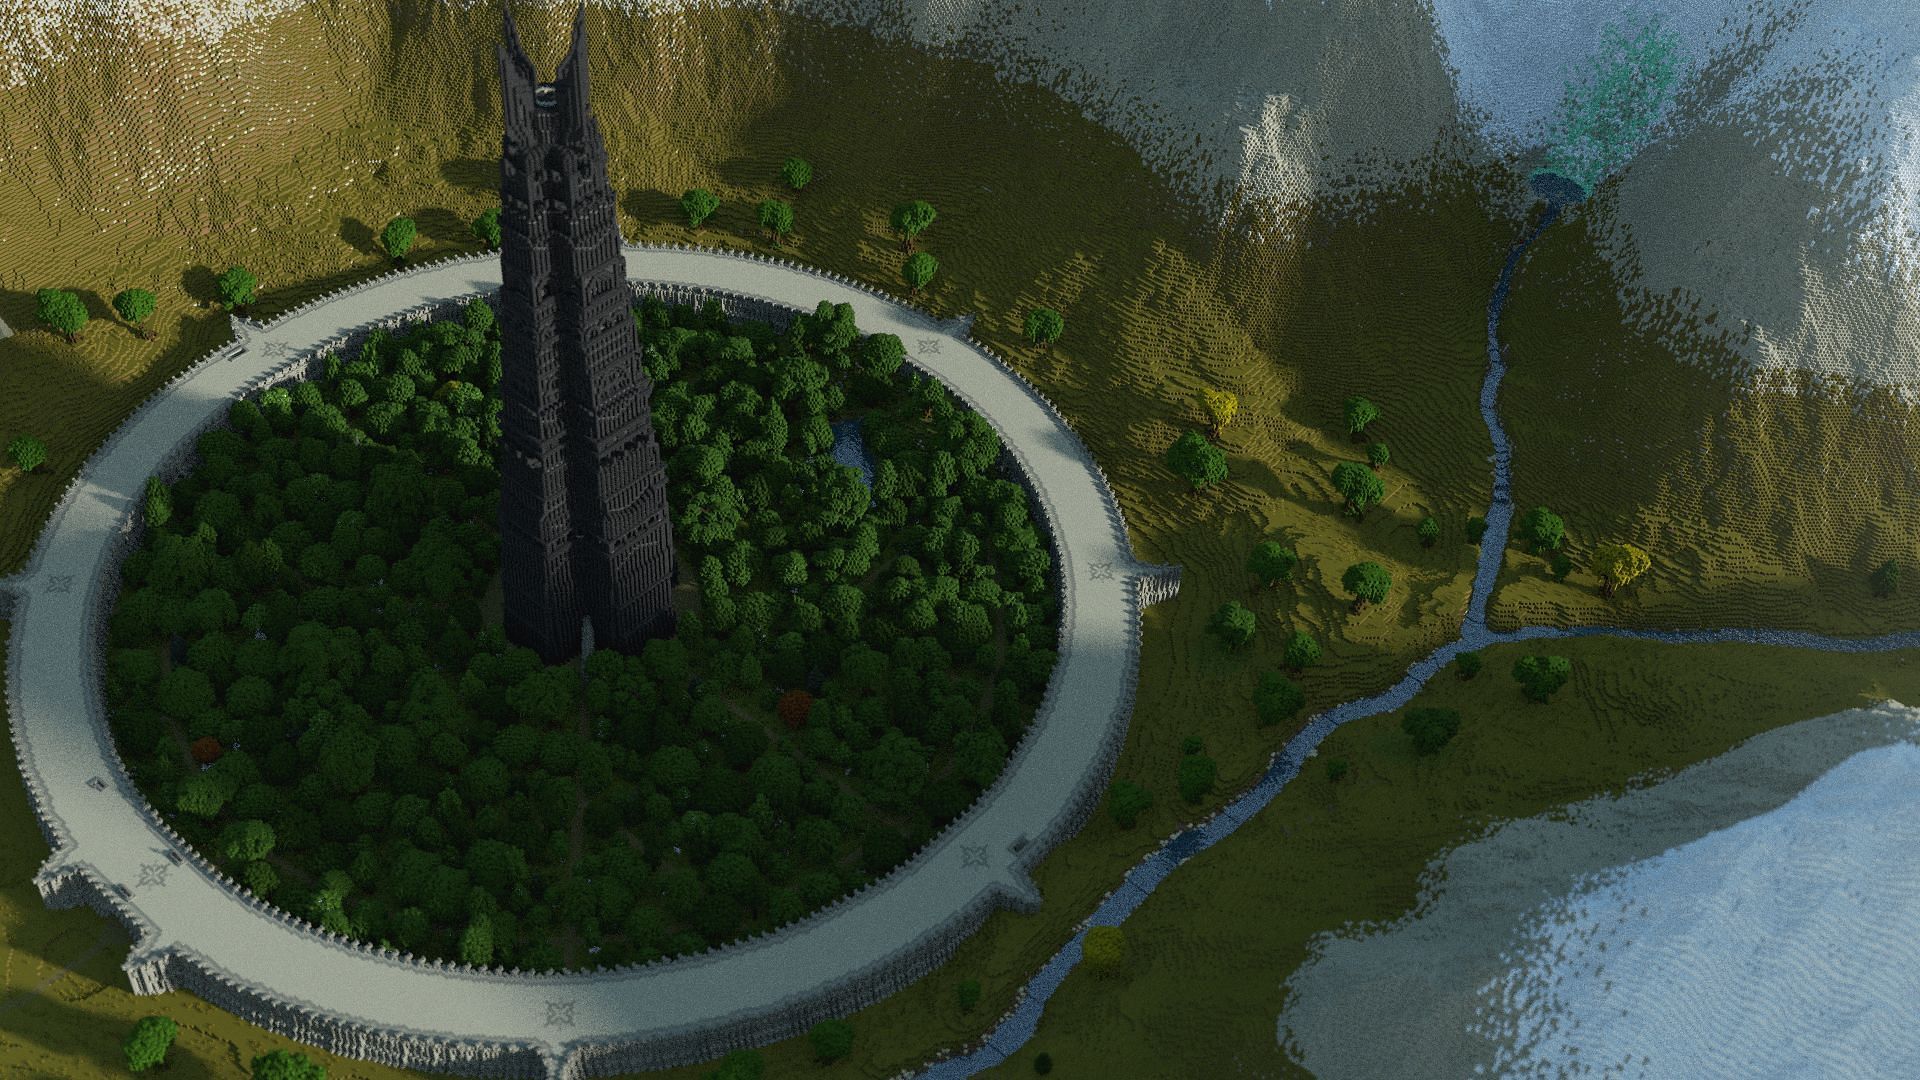 The Ring of Isengard in Minecraft Middle-earth (Image via Minecraft Middle-earth)